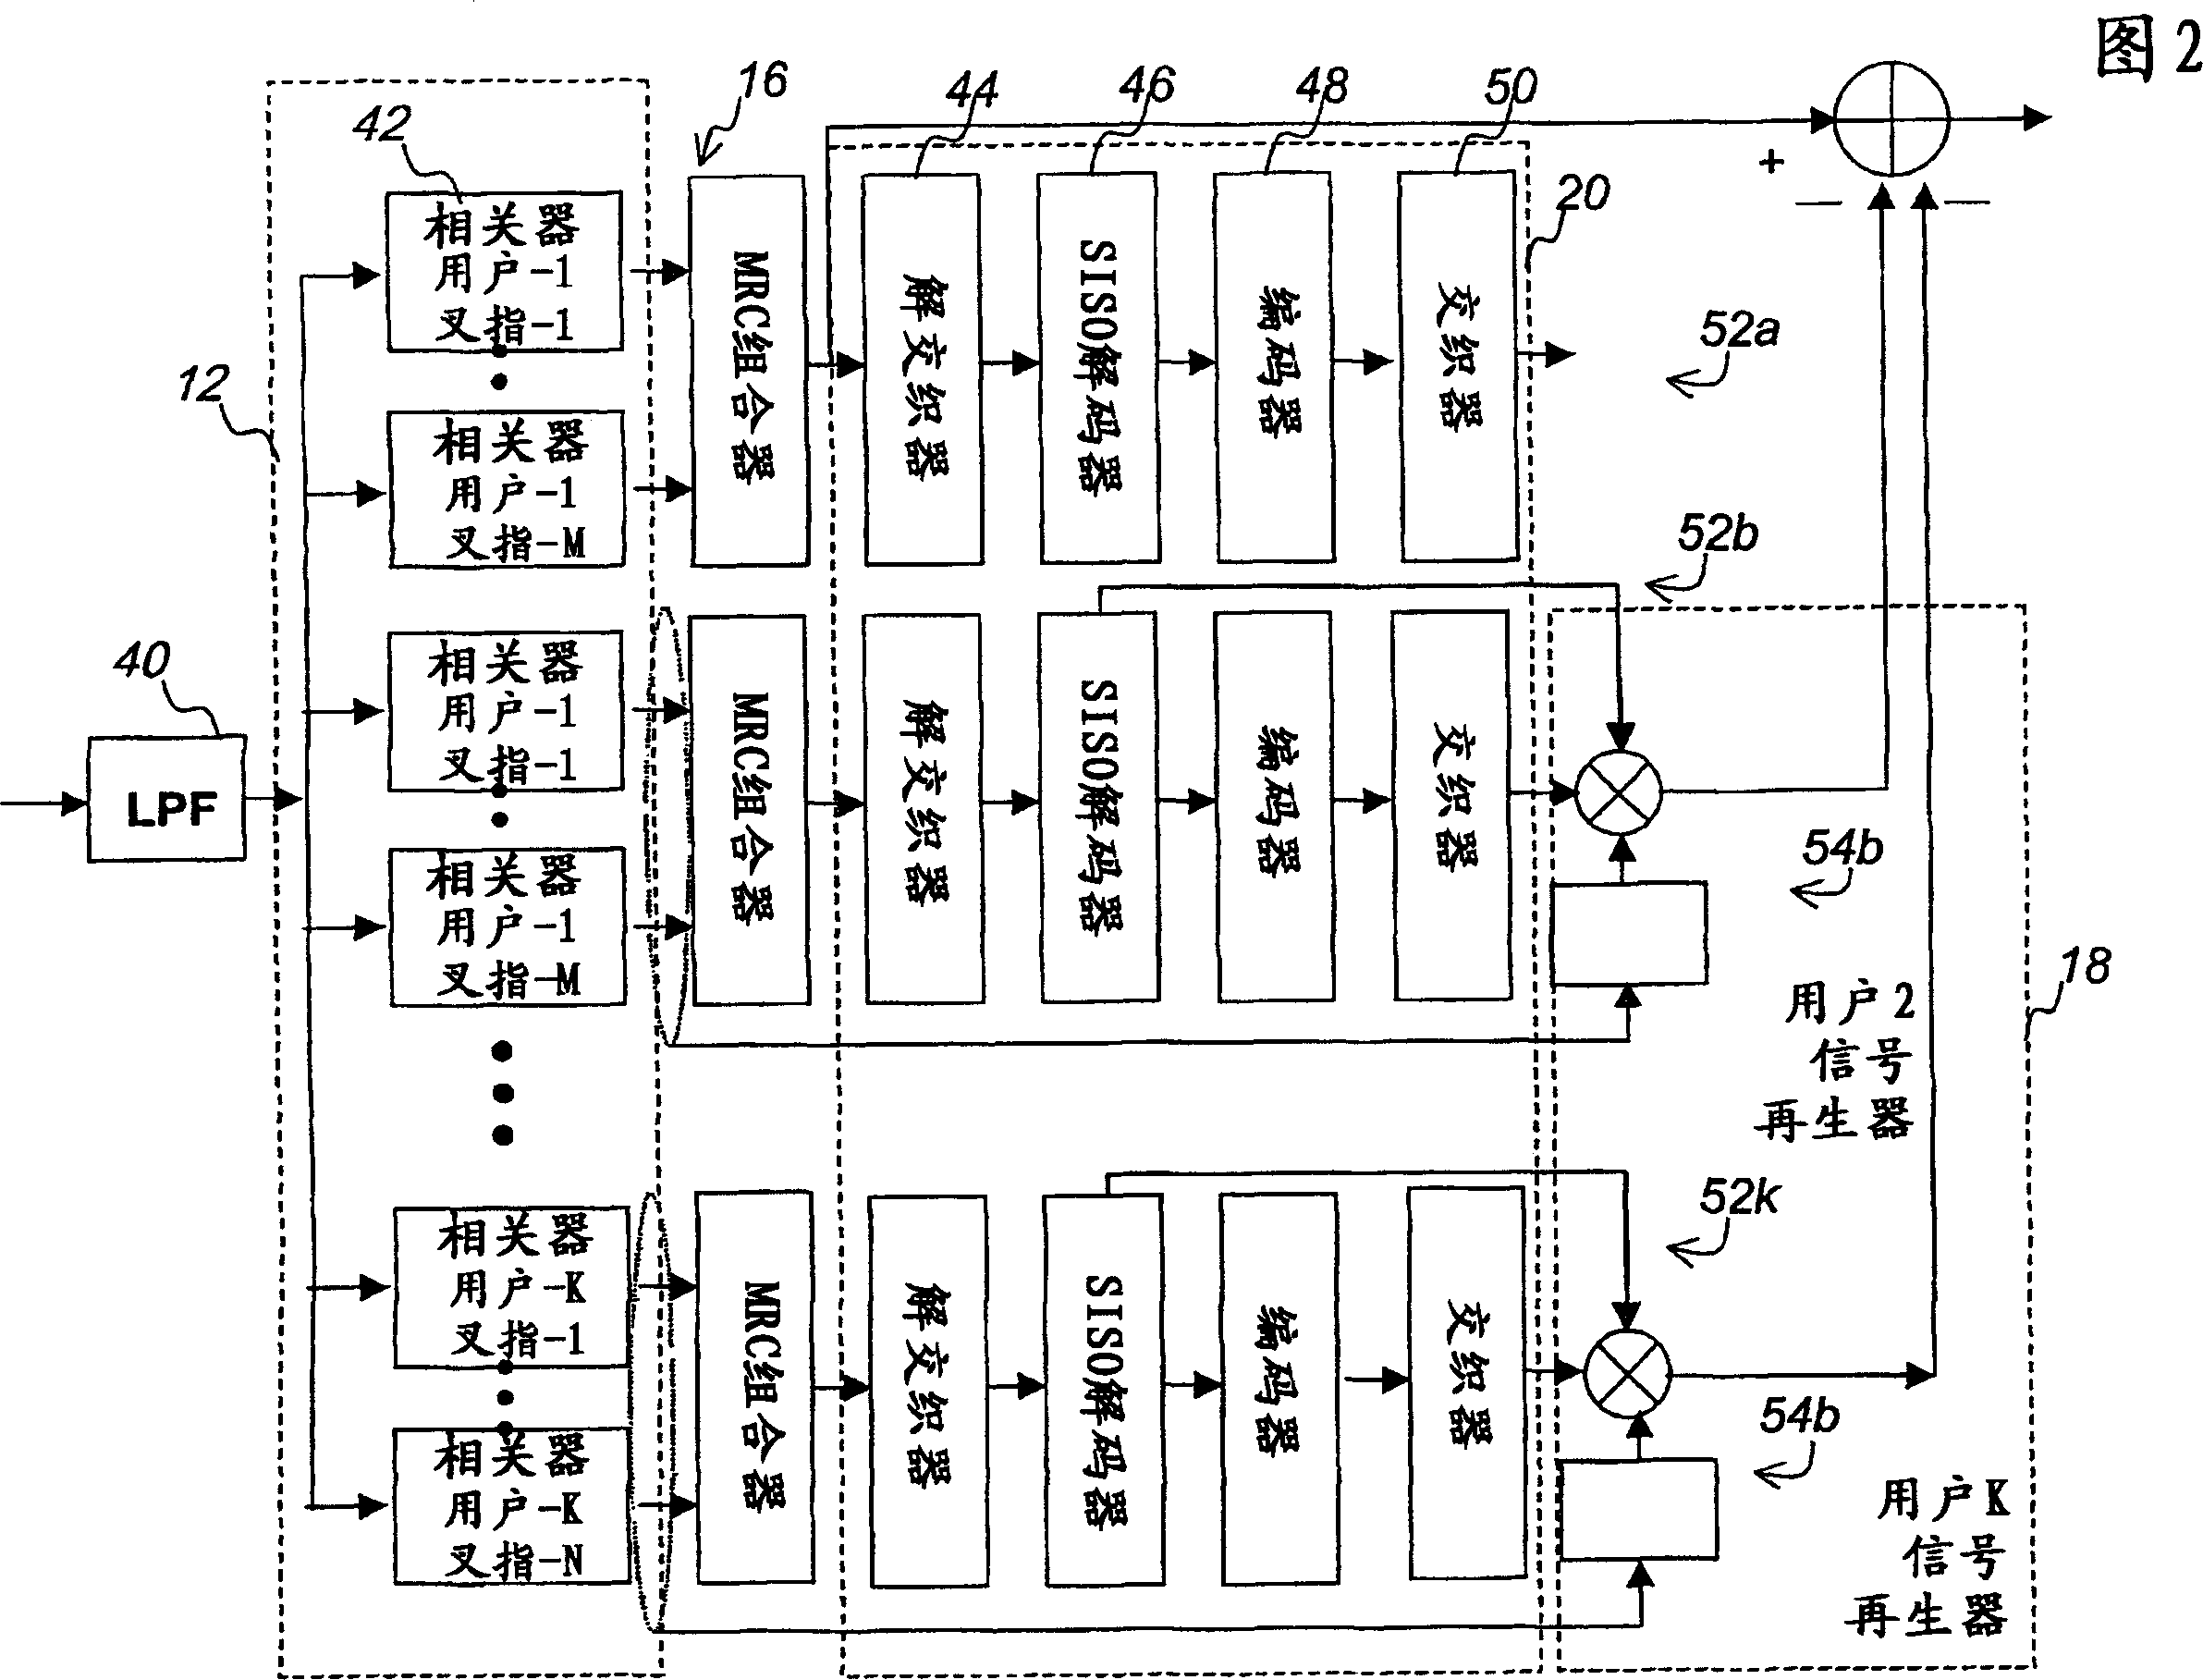 Multi-user detector for direct sequence-code division multiple access (DS/CDMA) channels